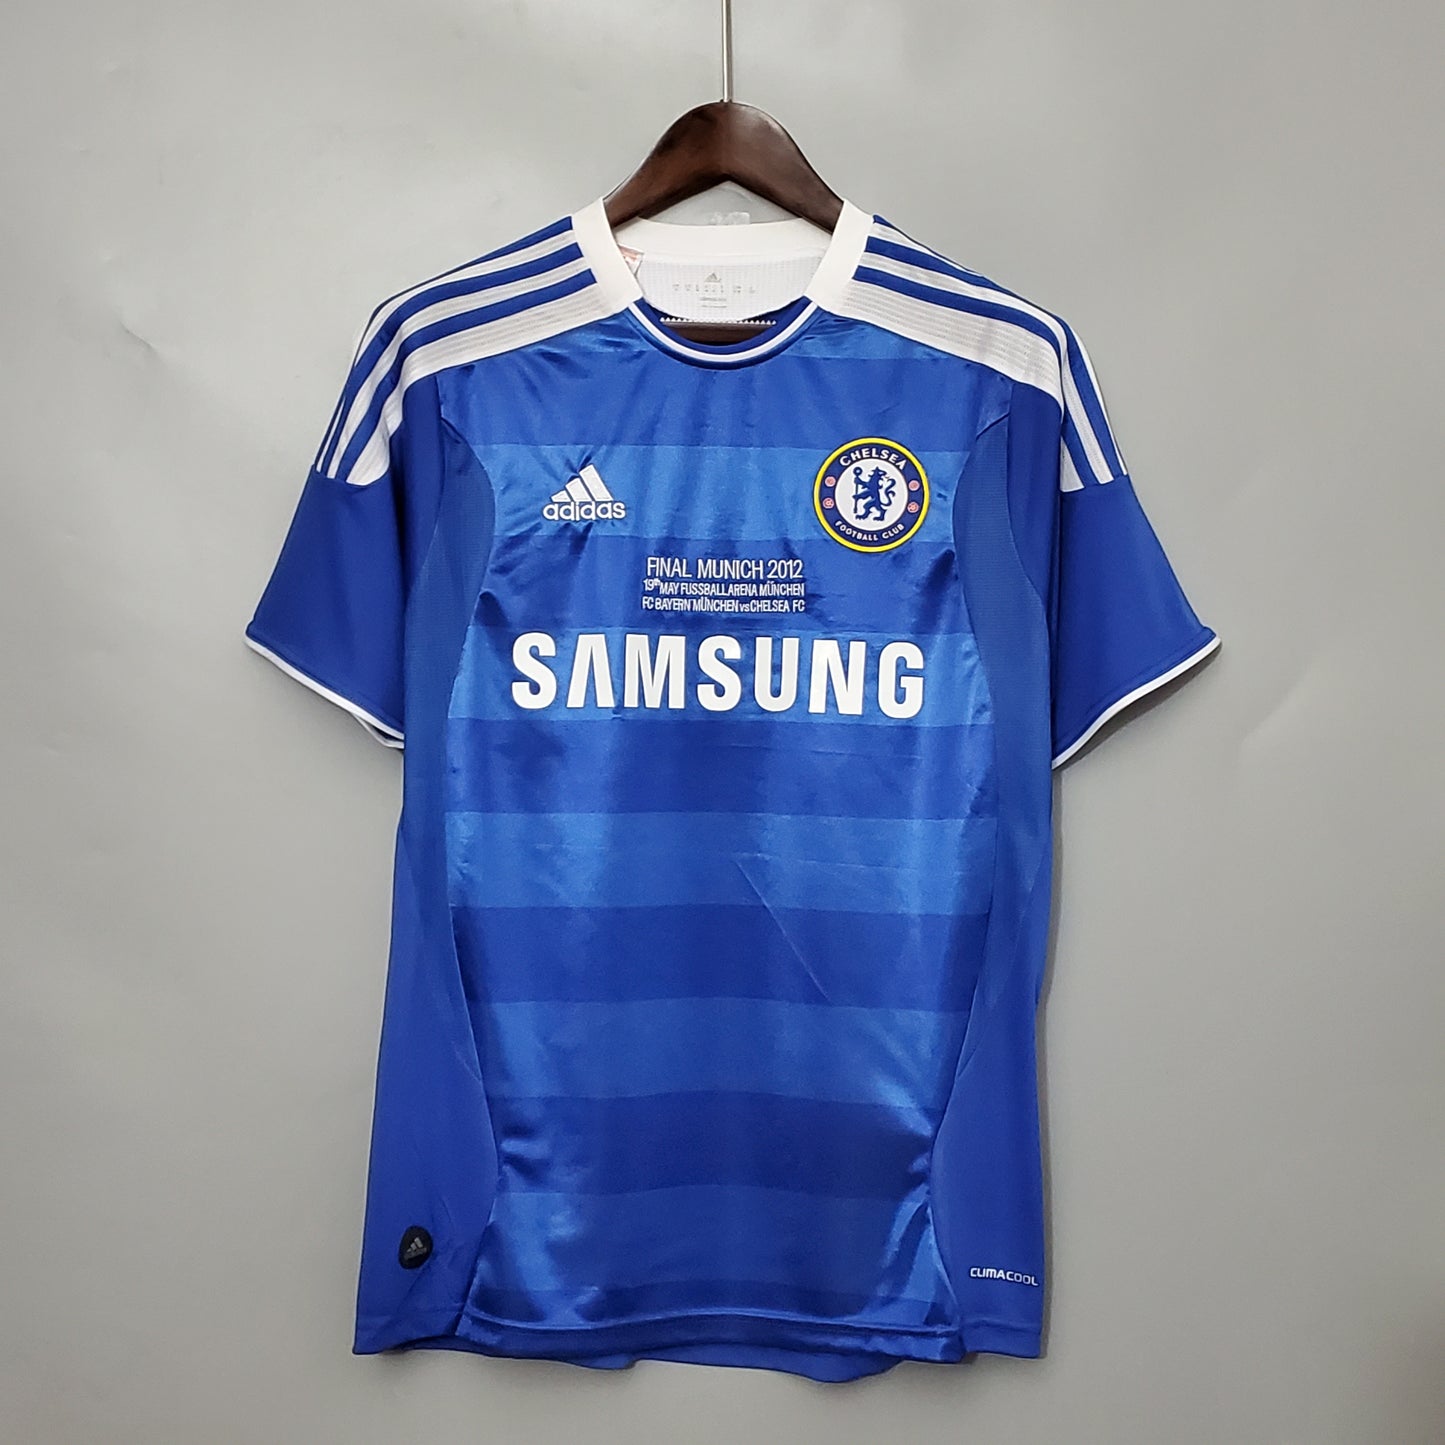 Chelsea 2012 Champions League Home Jersey